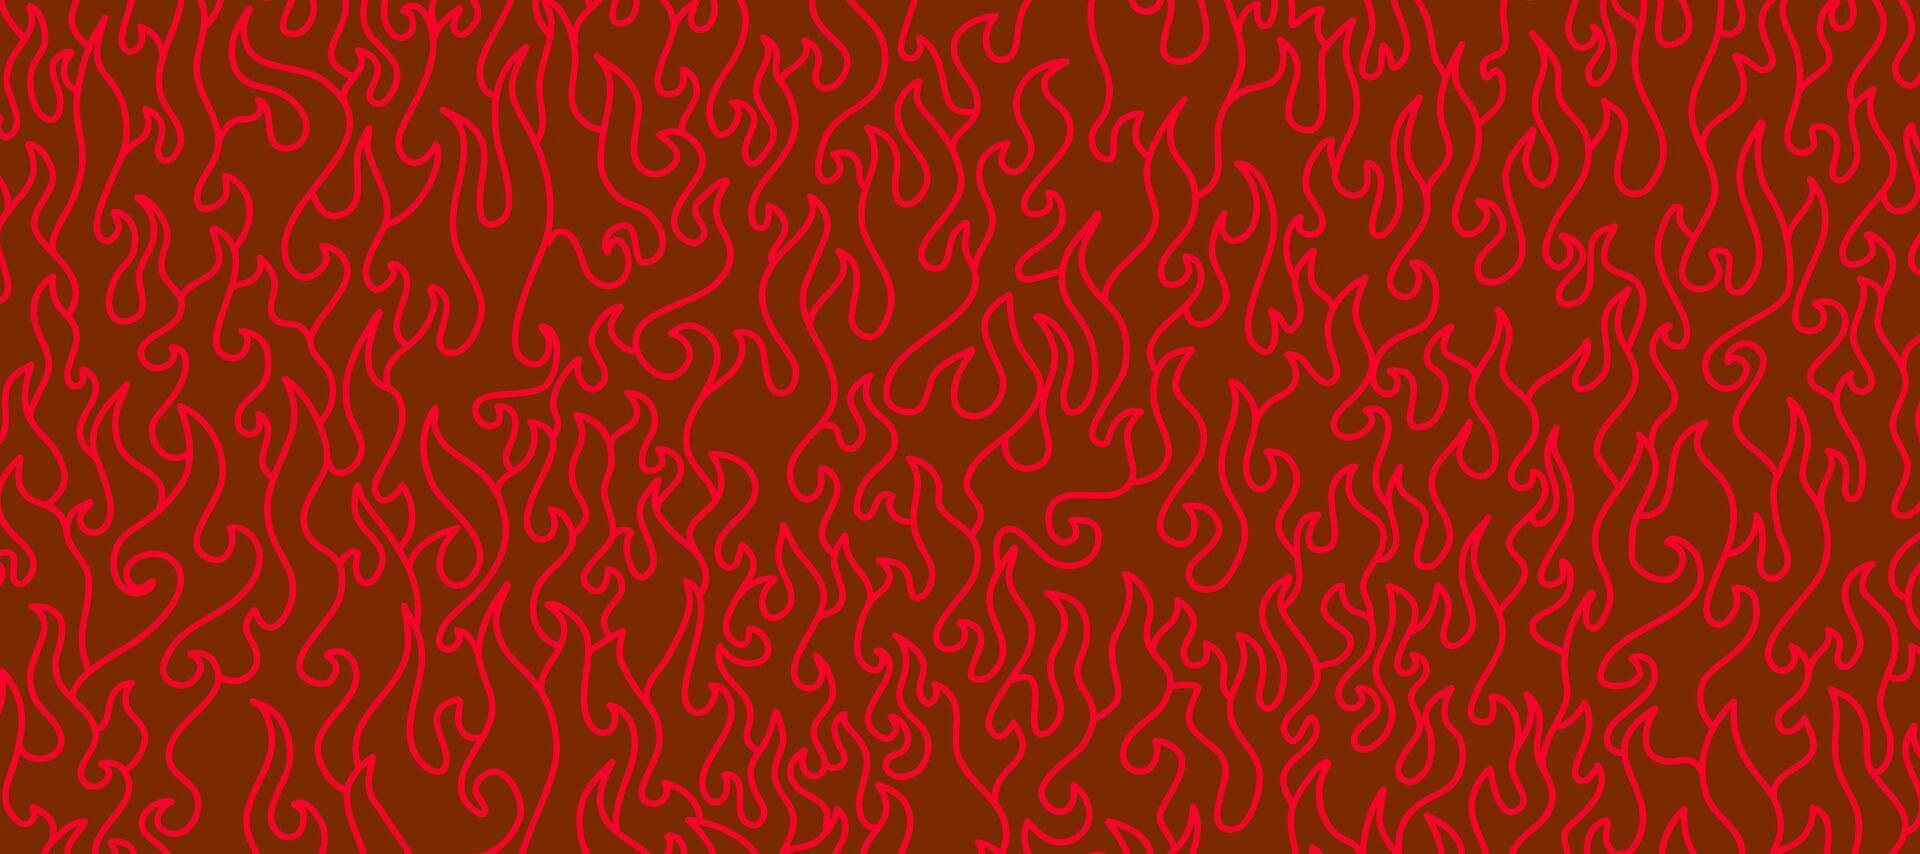 fire background. flame background. fire pattern background. flame pattern. vector